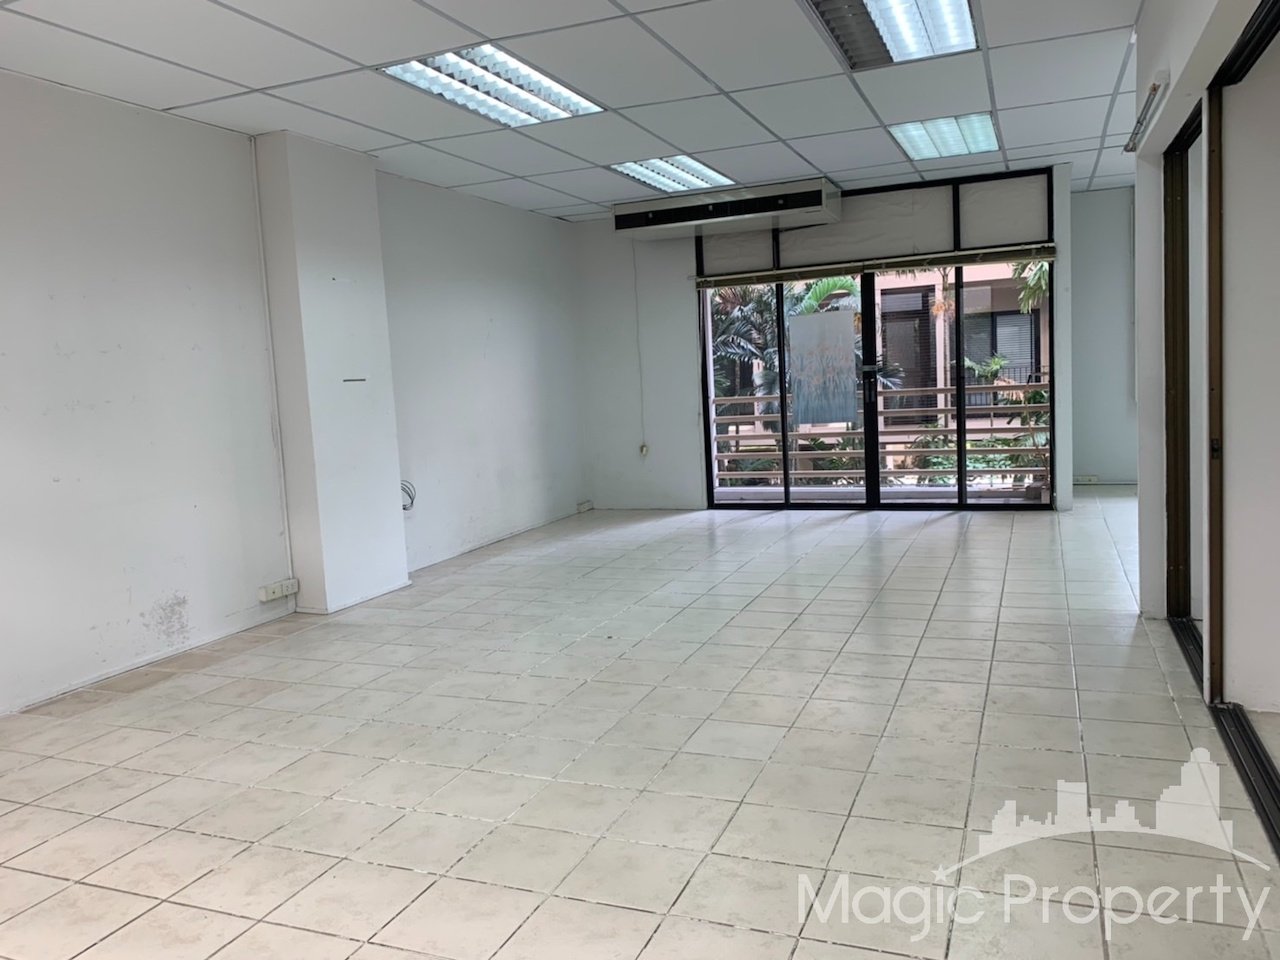 Office Space For Rent in Sukhumvit 50